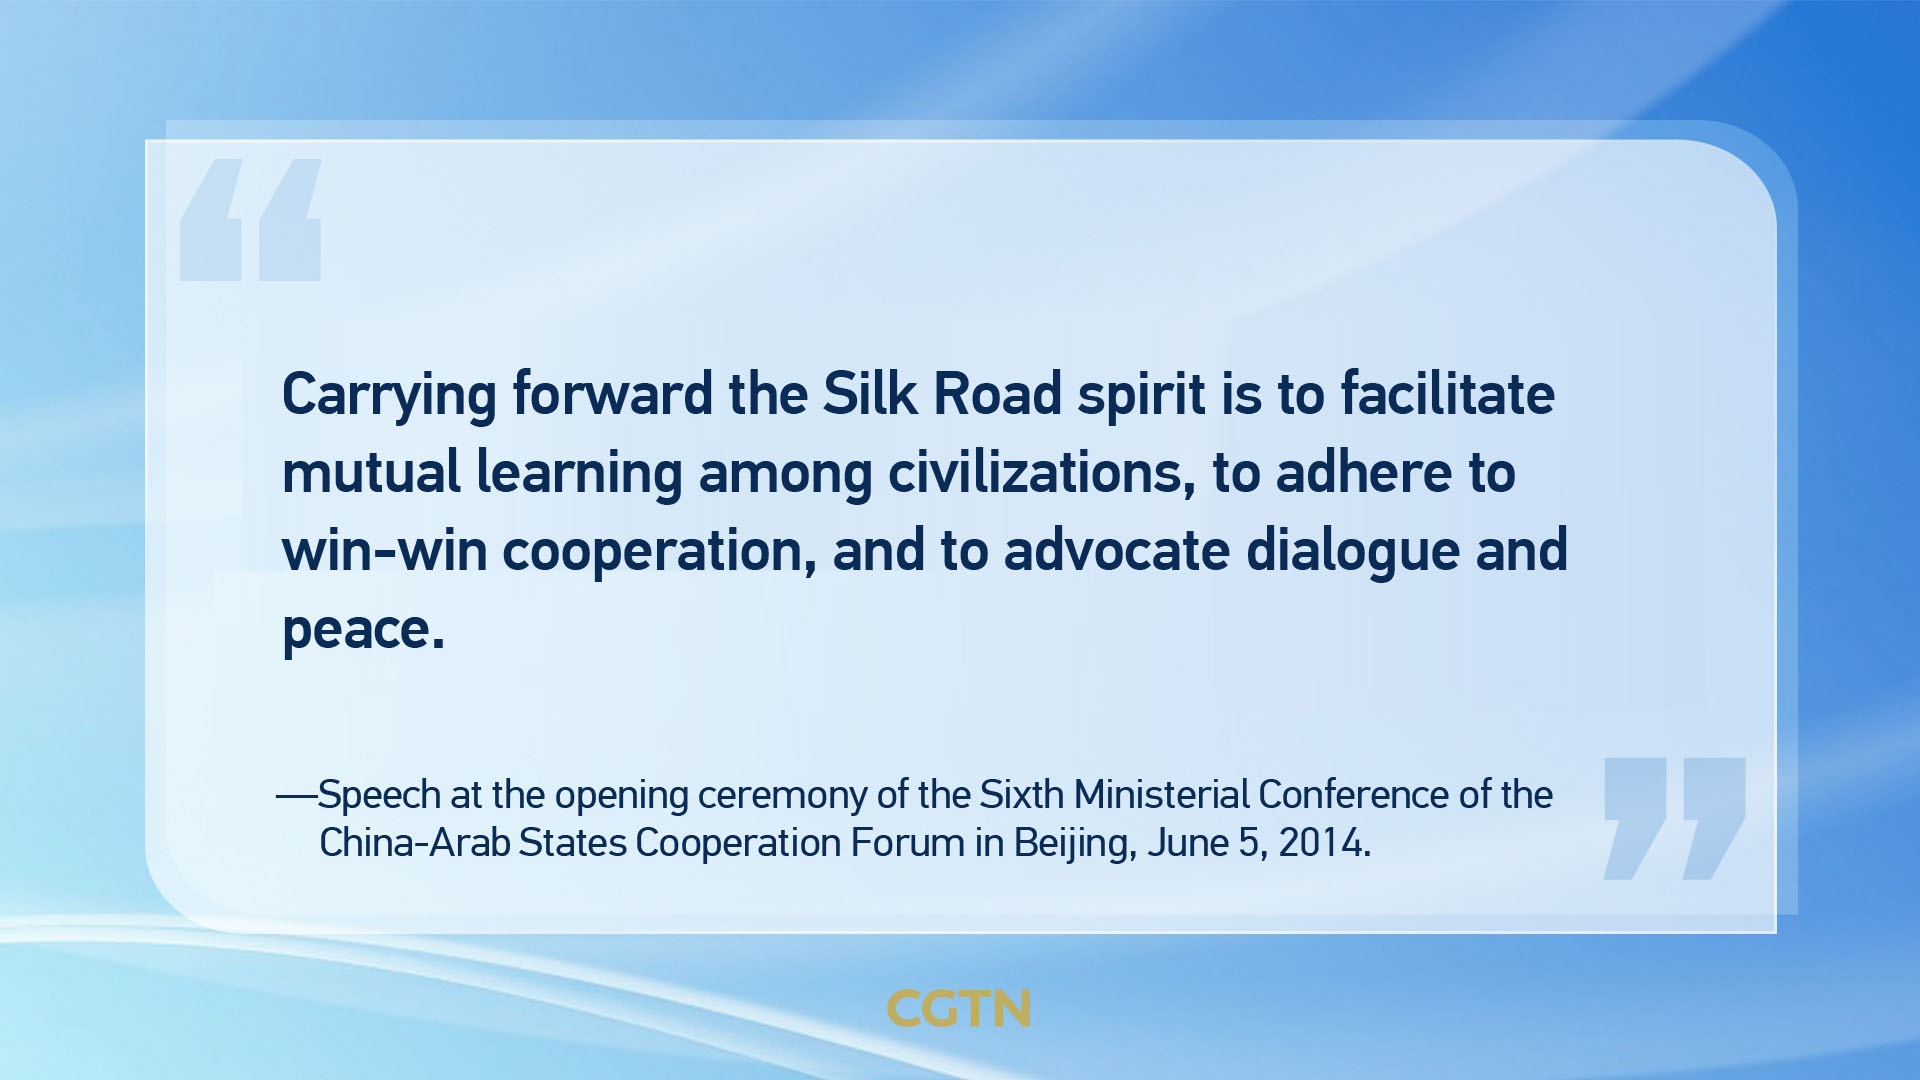 Key quotes from Xi Jinping's remarks on China-Arab friendship